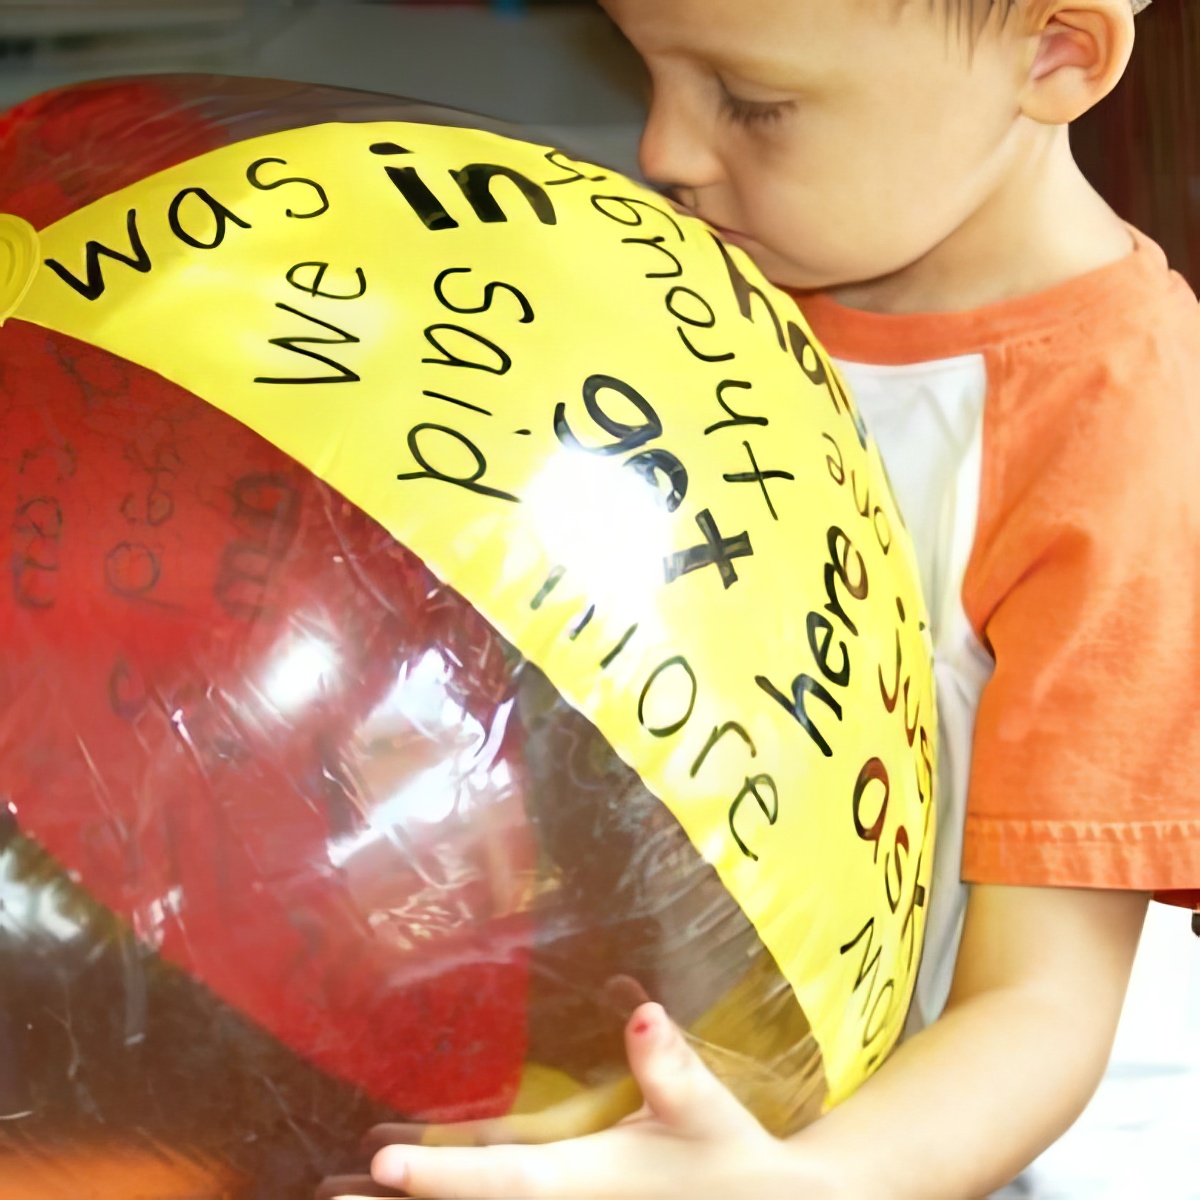 Have fun playing a beach ball while learning sight words with your kids!